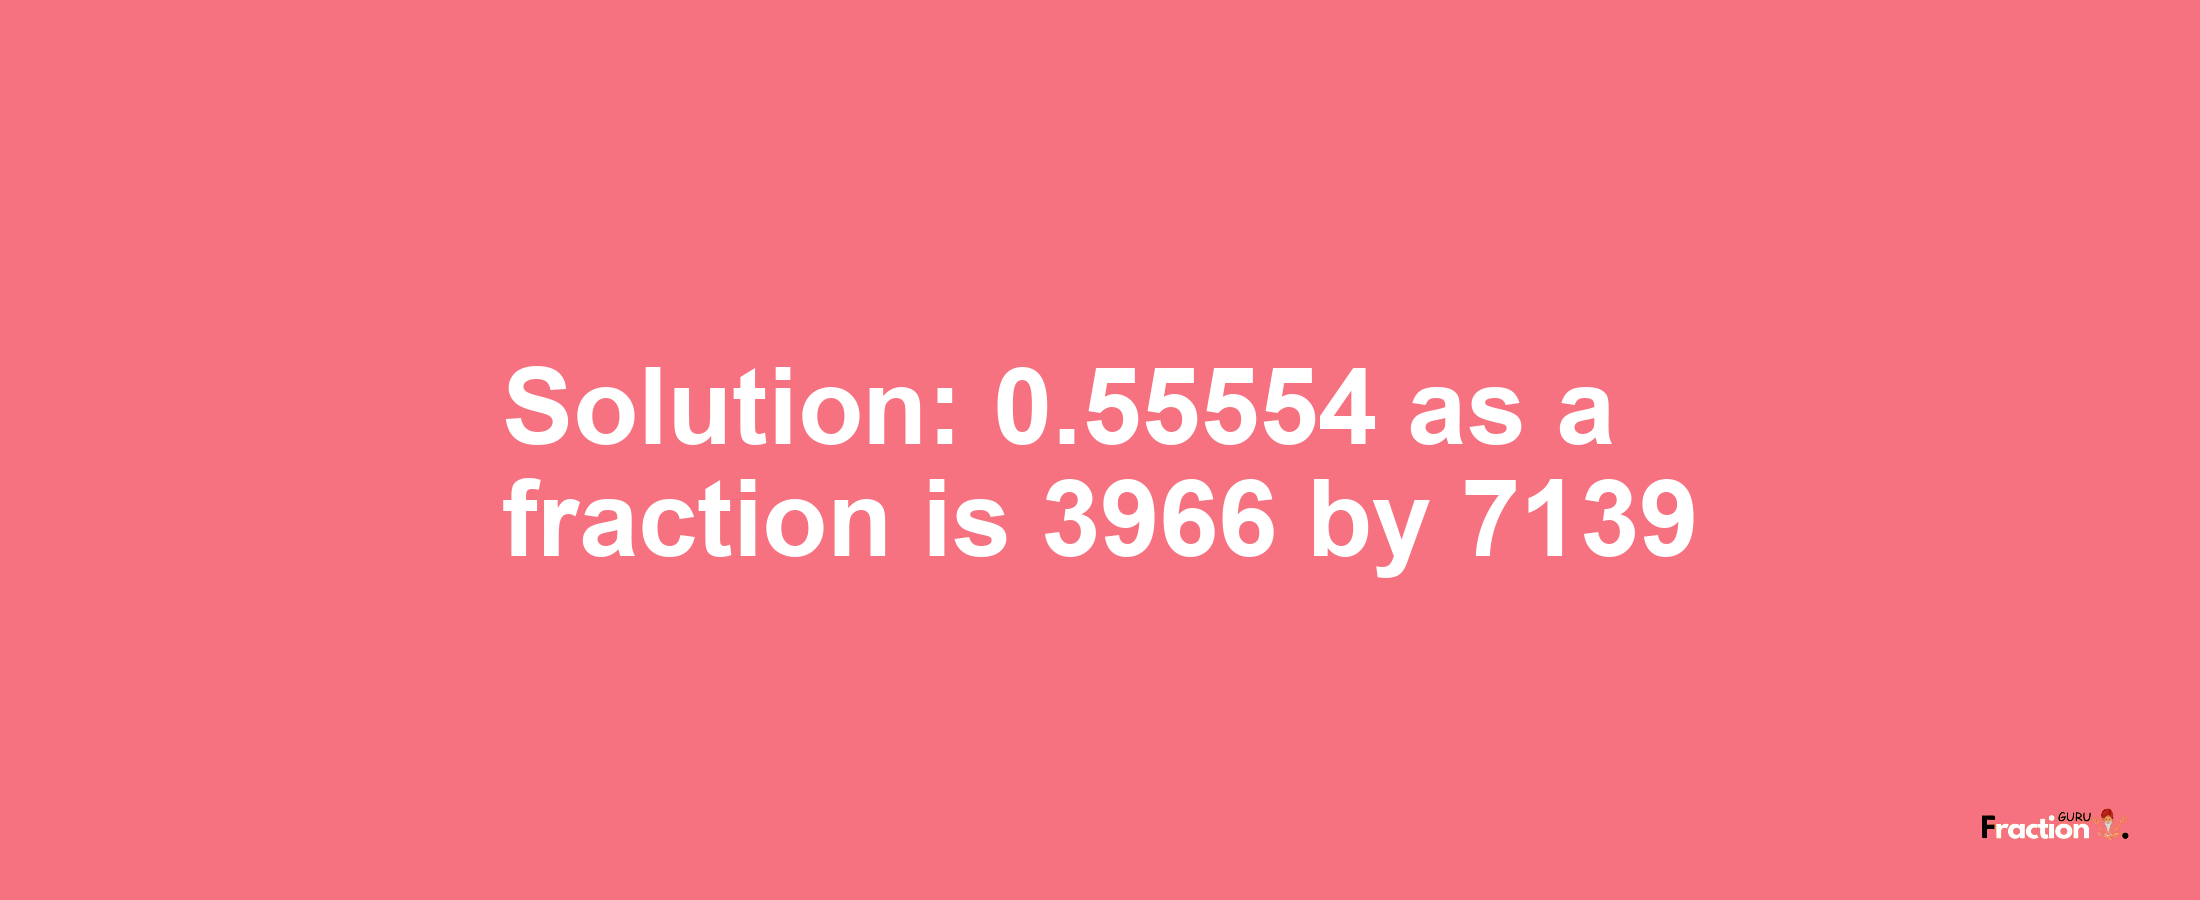 Solution:0.55554 as a fraction is 3966/7139